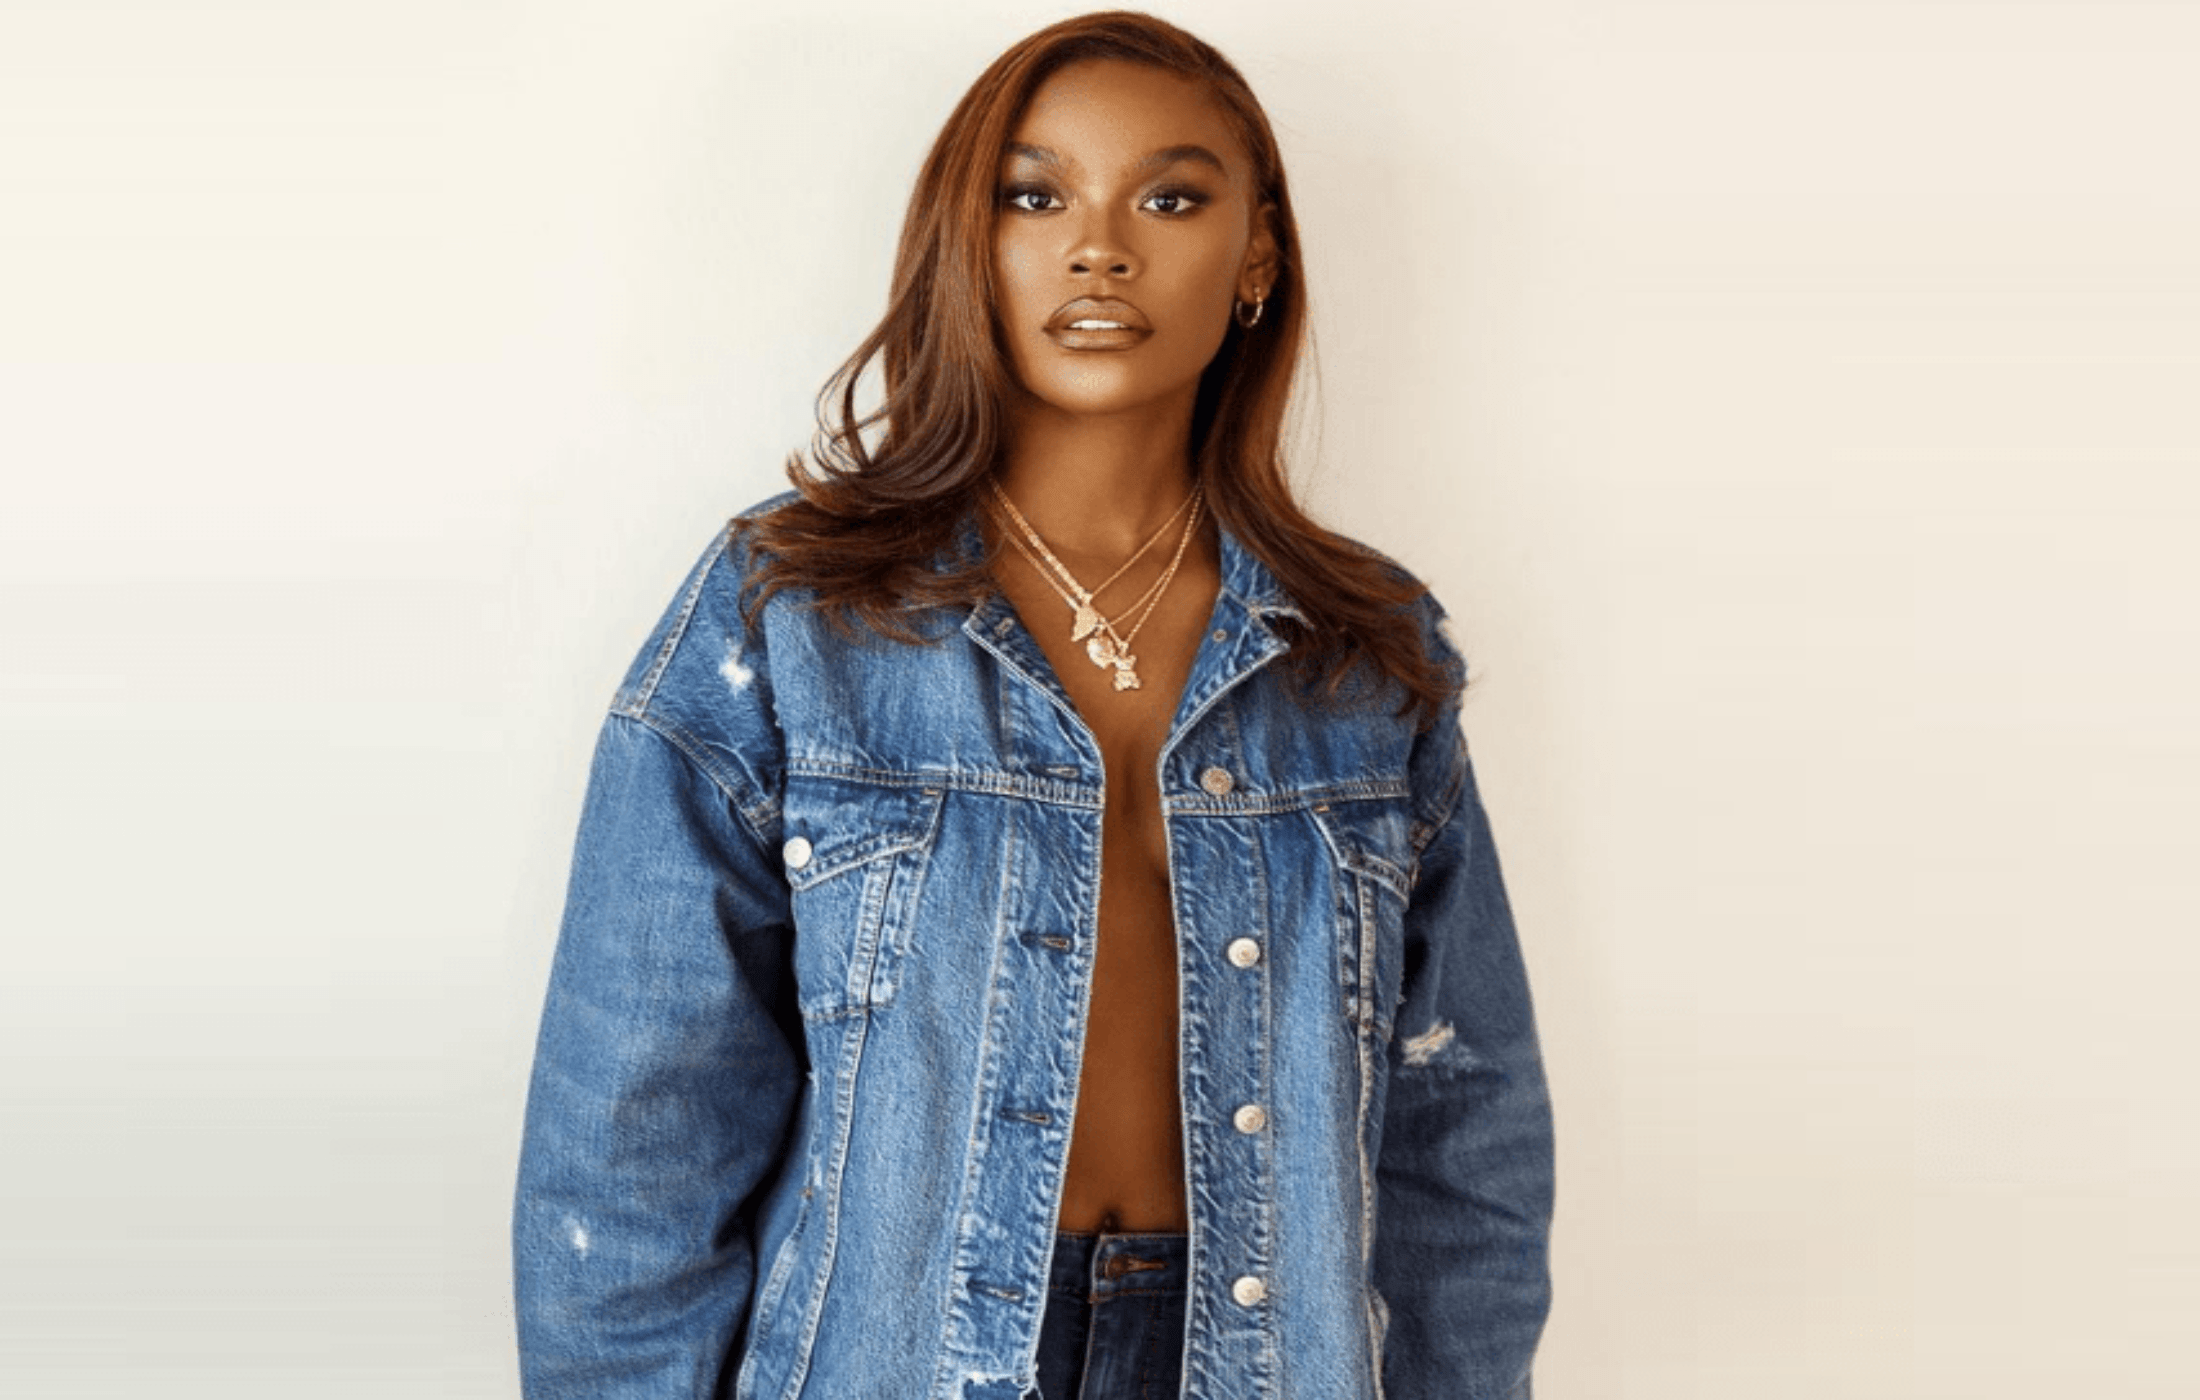 Who is Choyce Brown? Age, children, wife, career, profiles, net worth